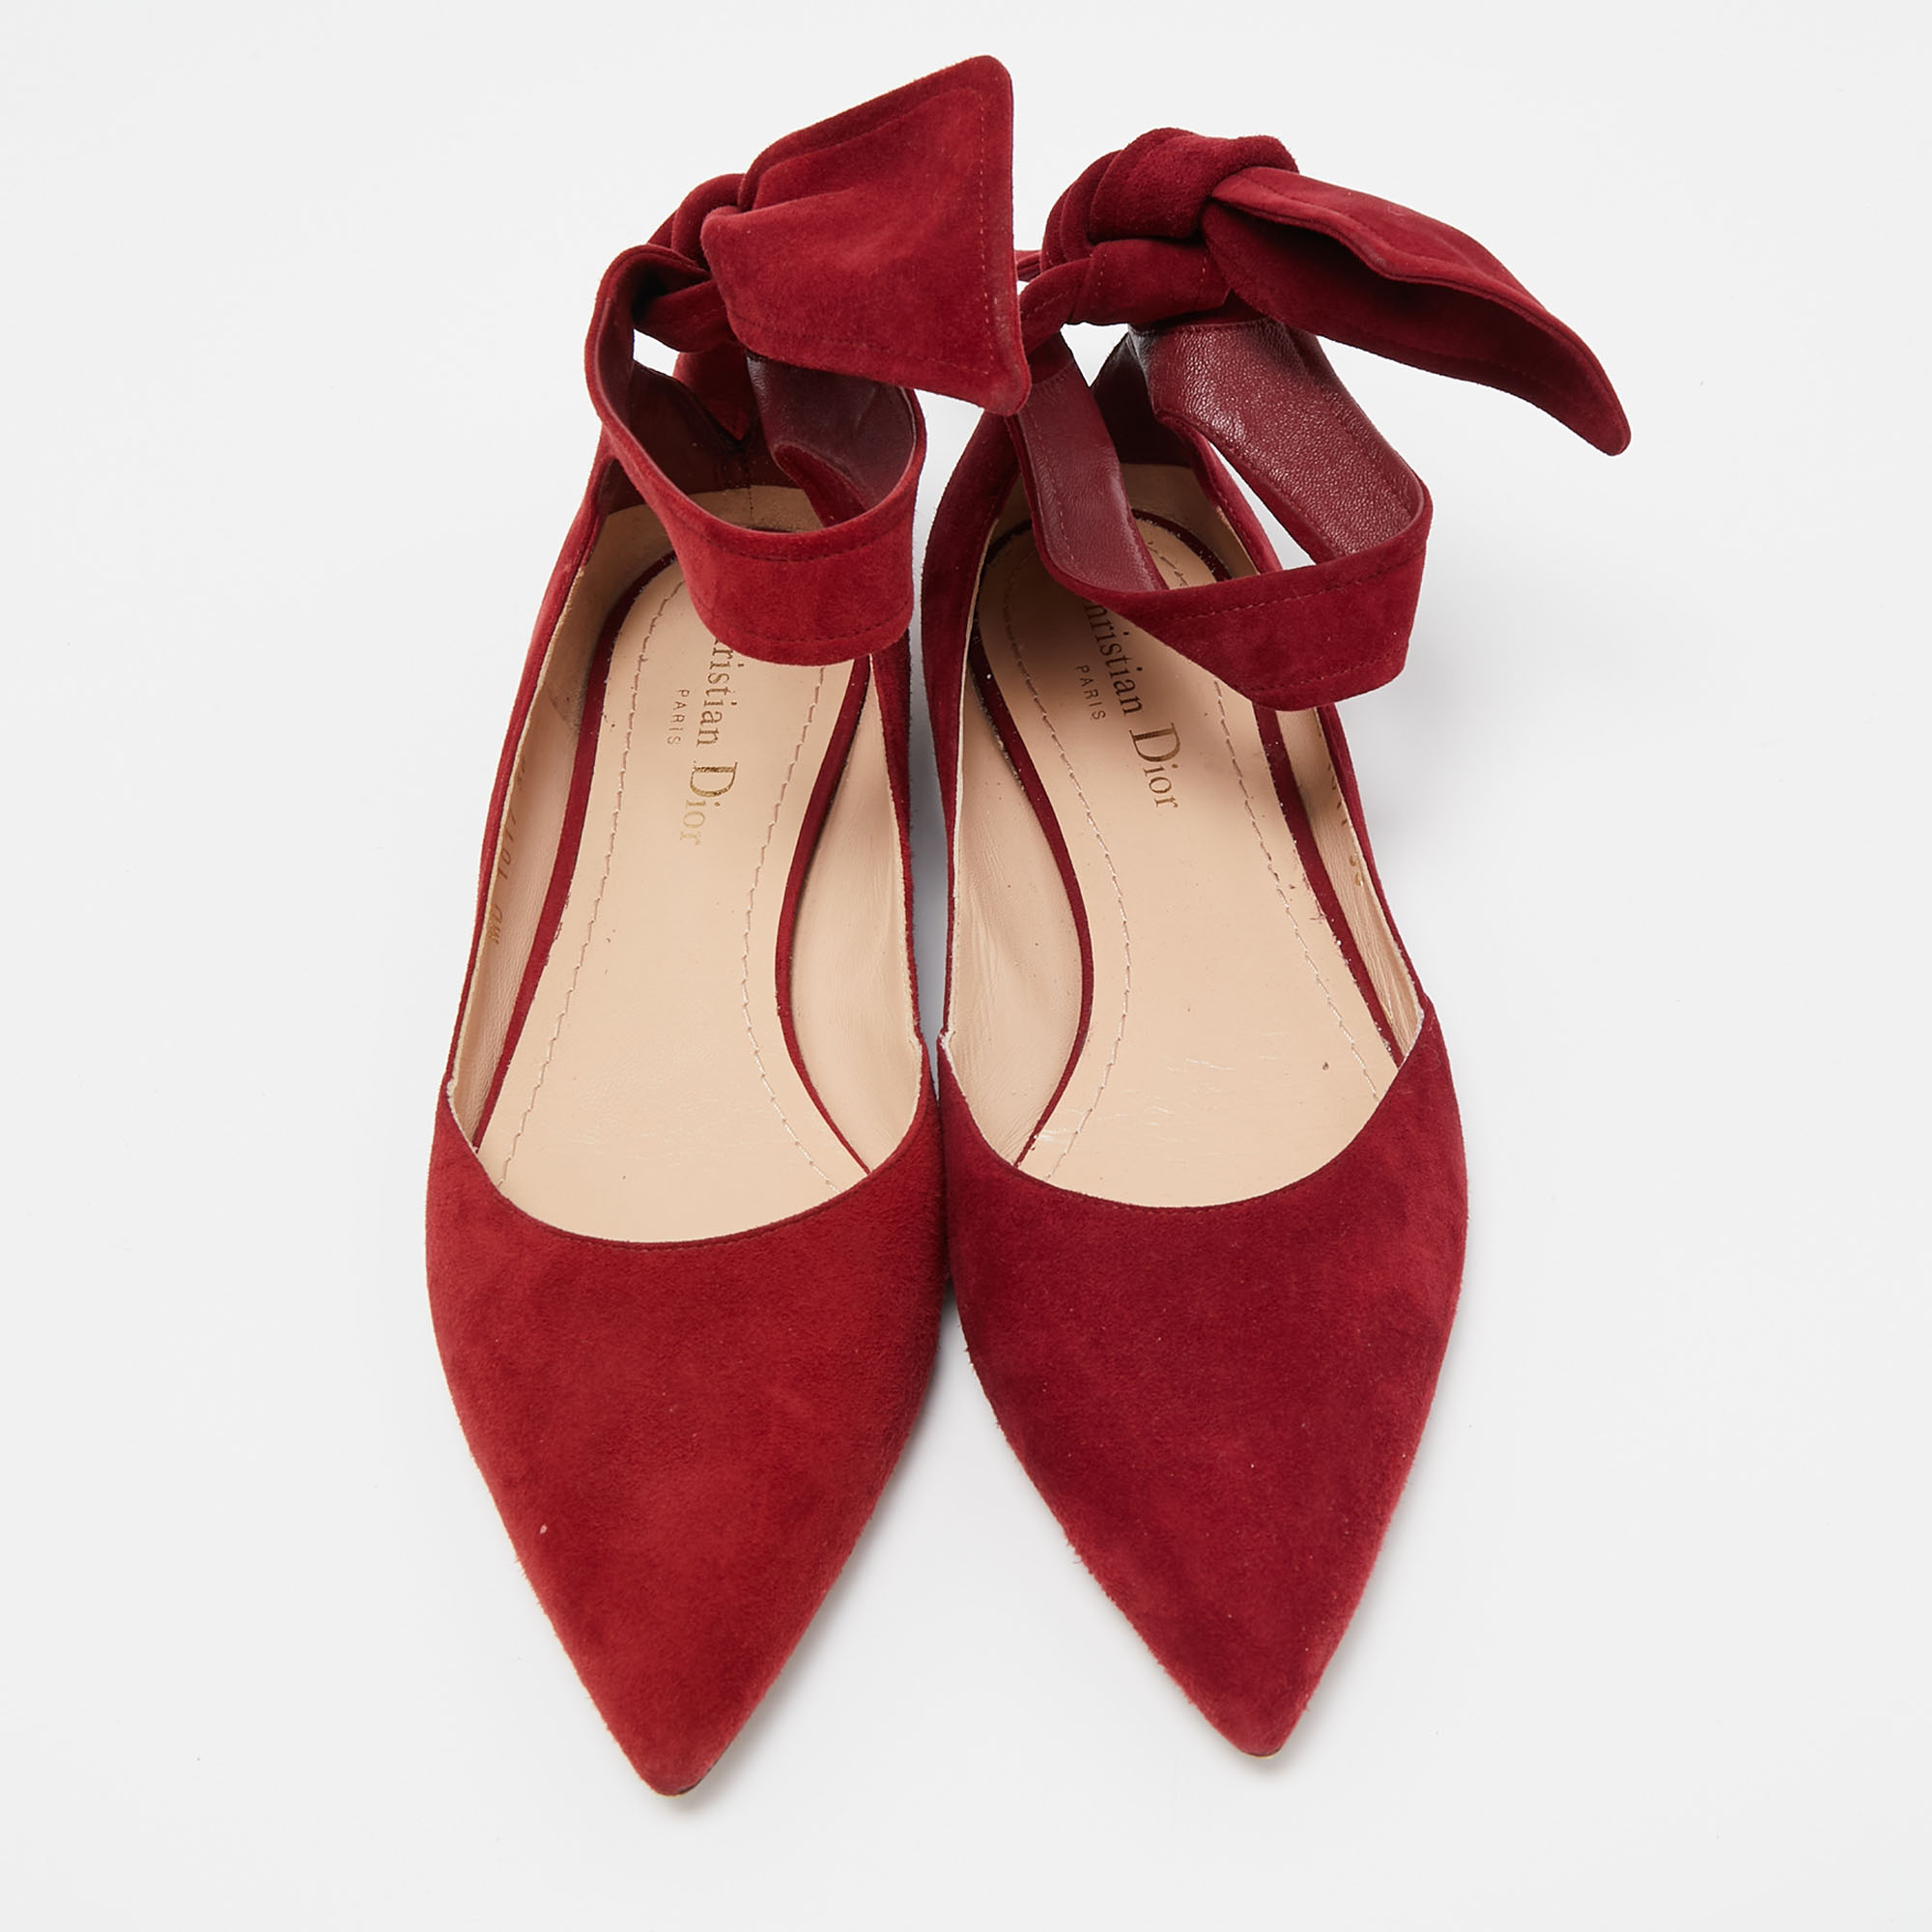 Dior Red Suede Ankle Wrap Ballet Flats Size 38